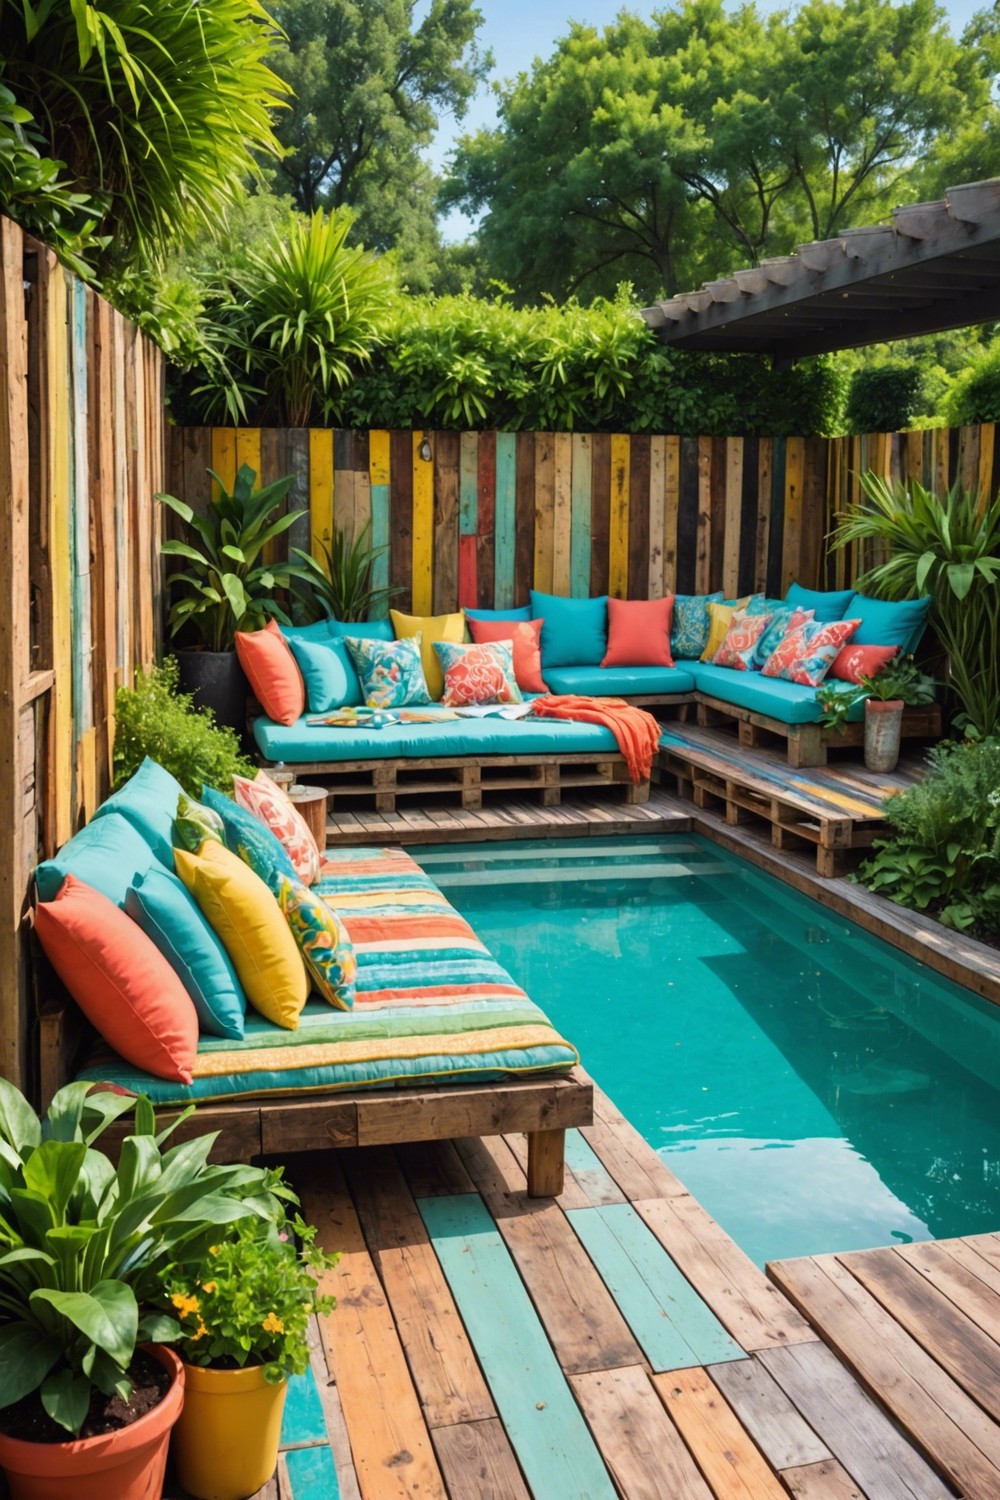 Upcycled Pallet Pool Decks with Colorful Cushions